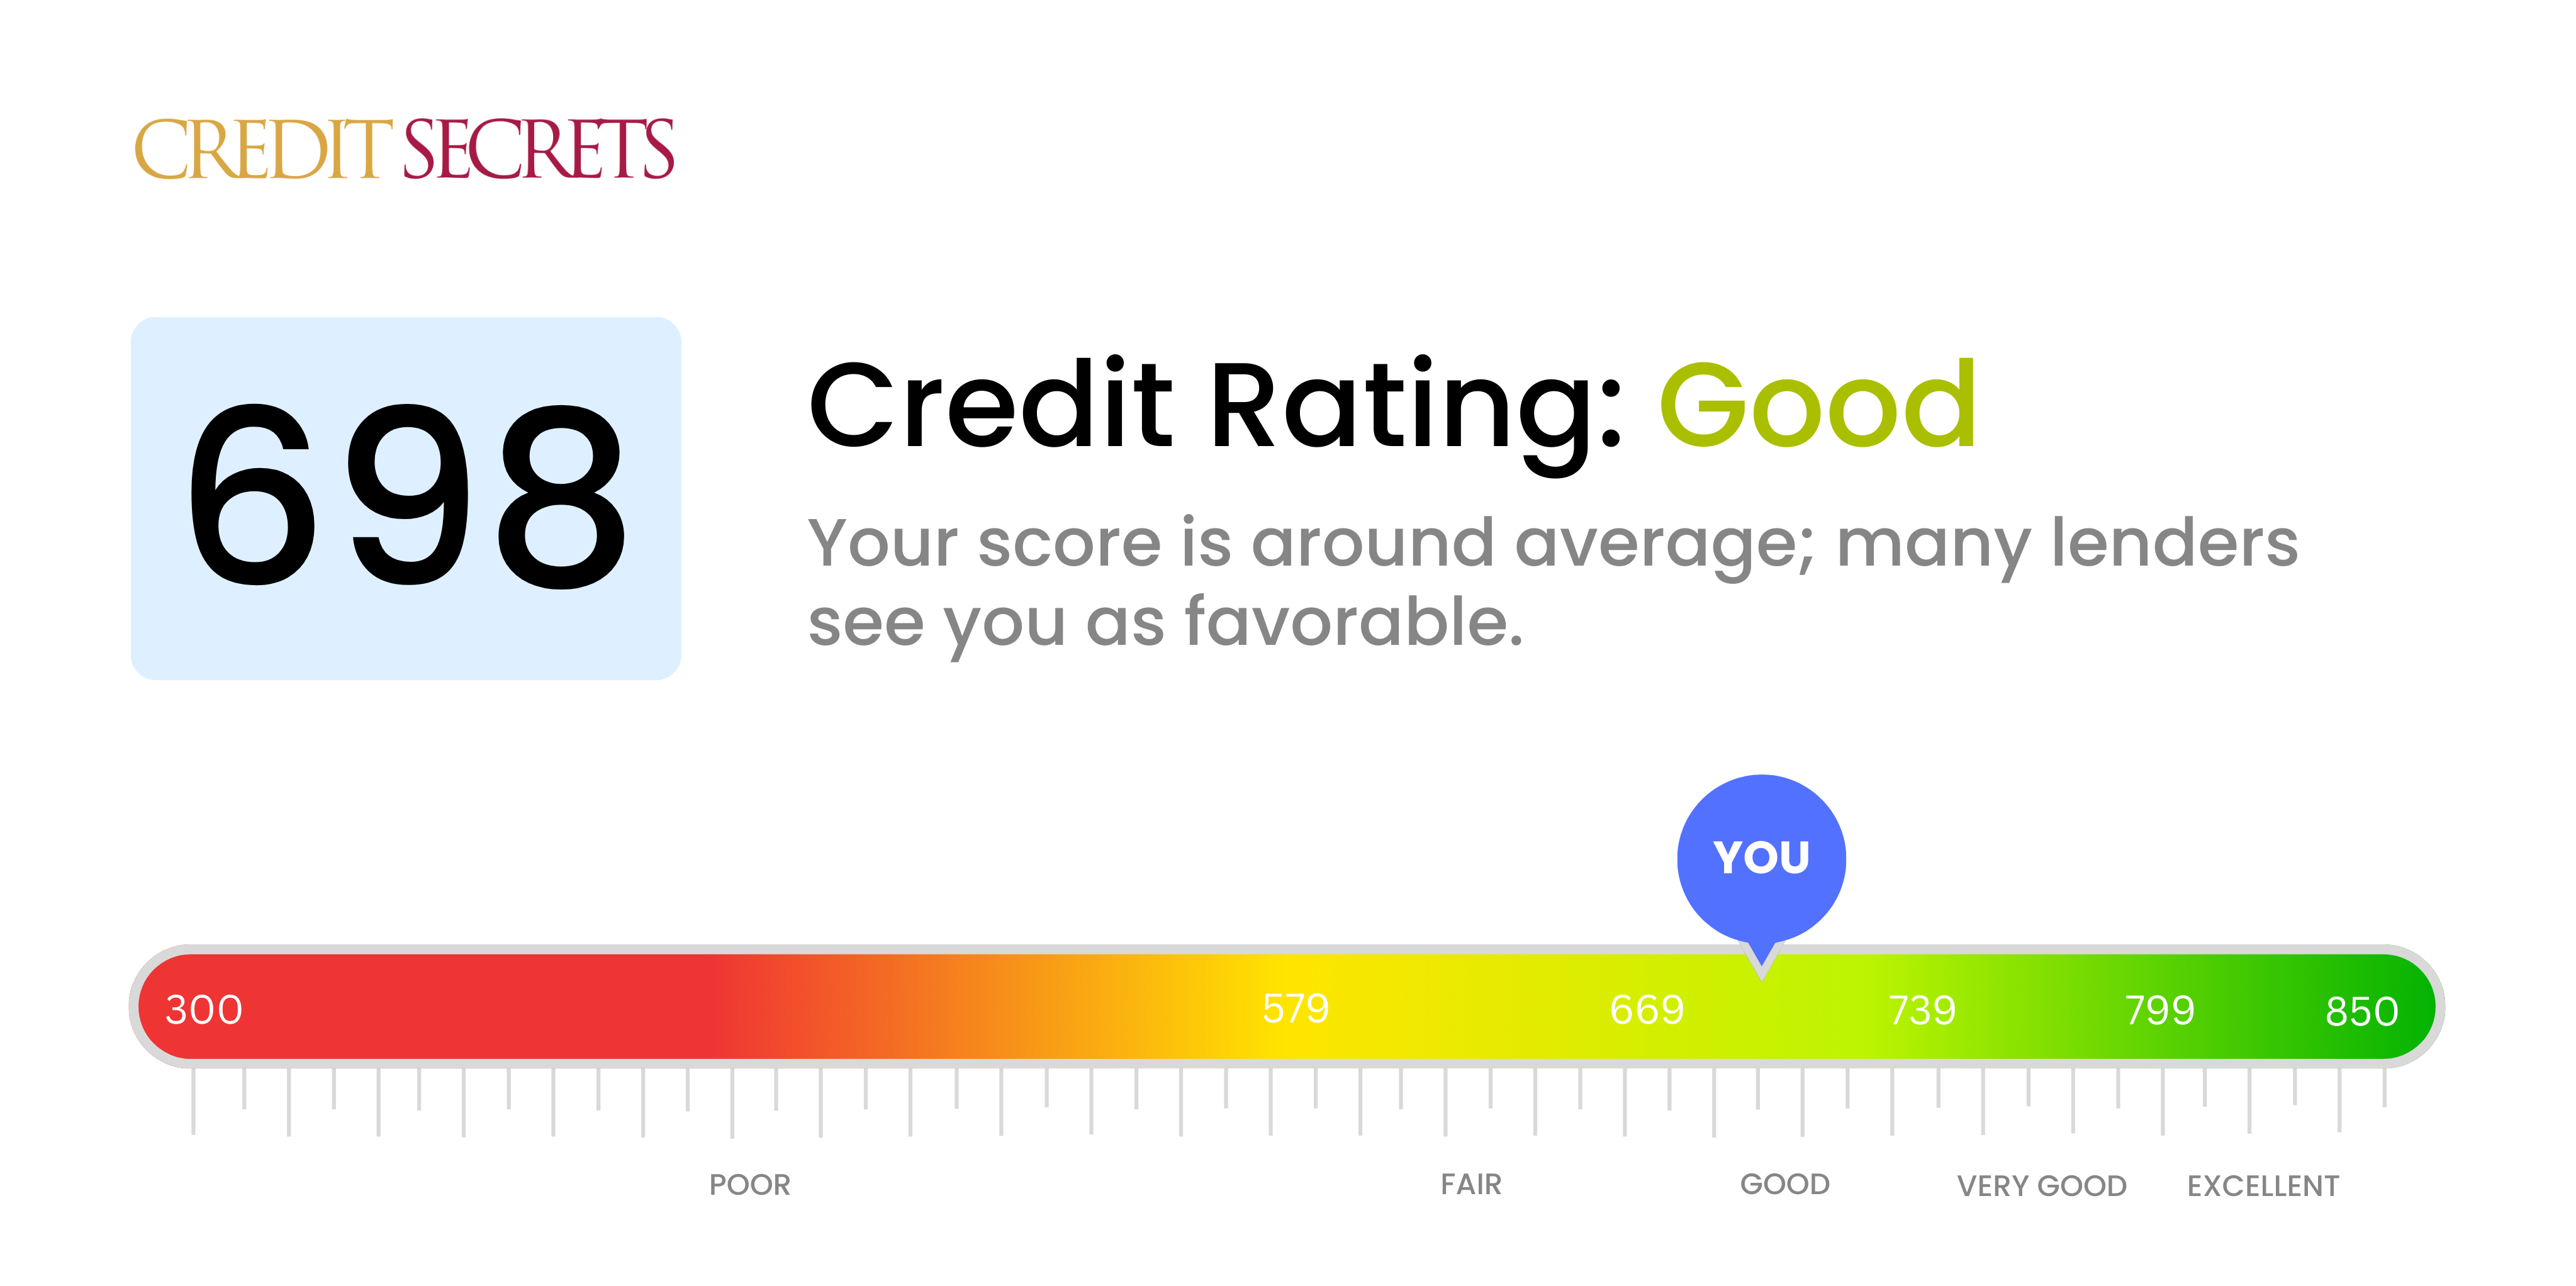 Is 698 a good credit score?